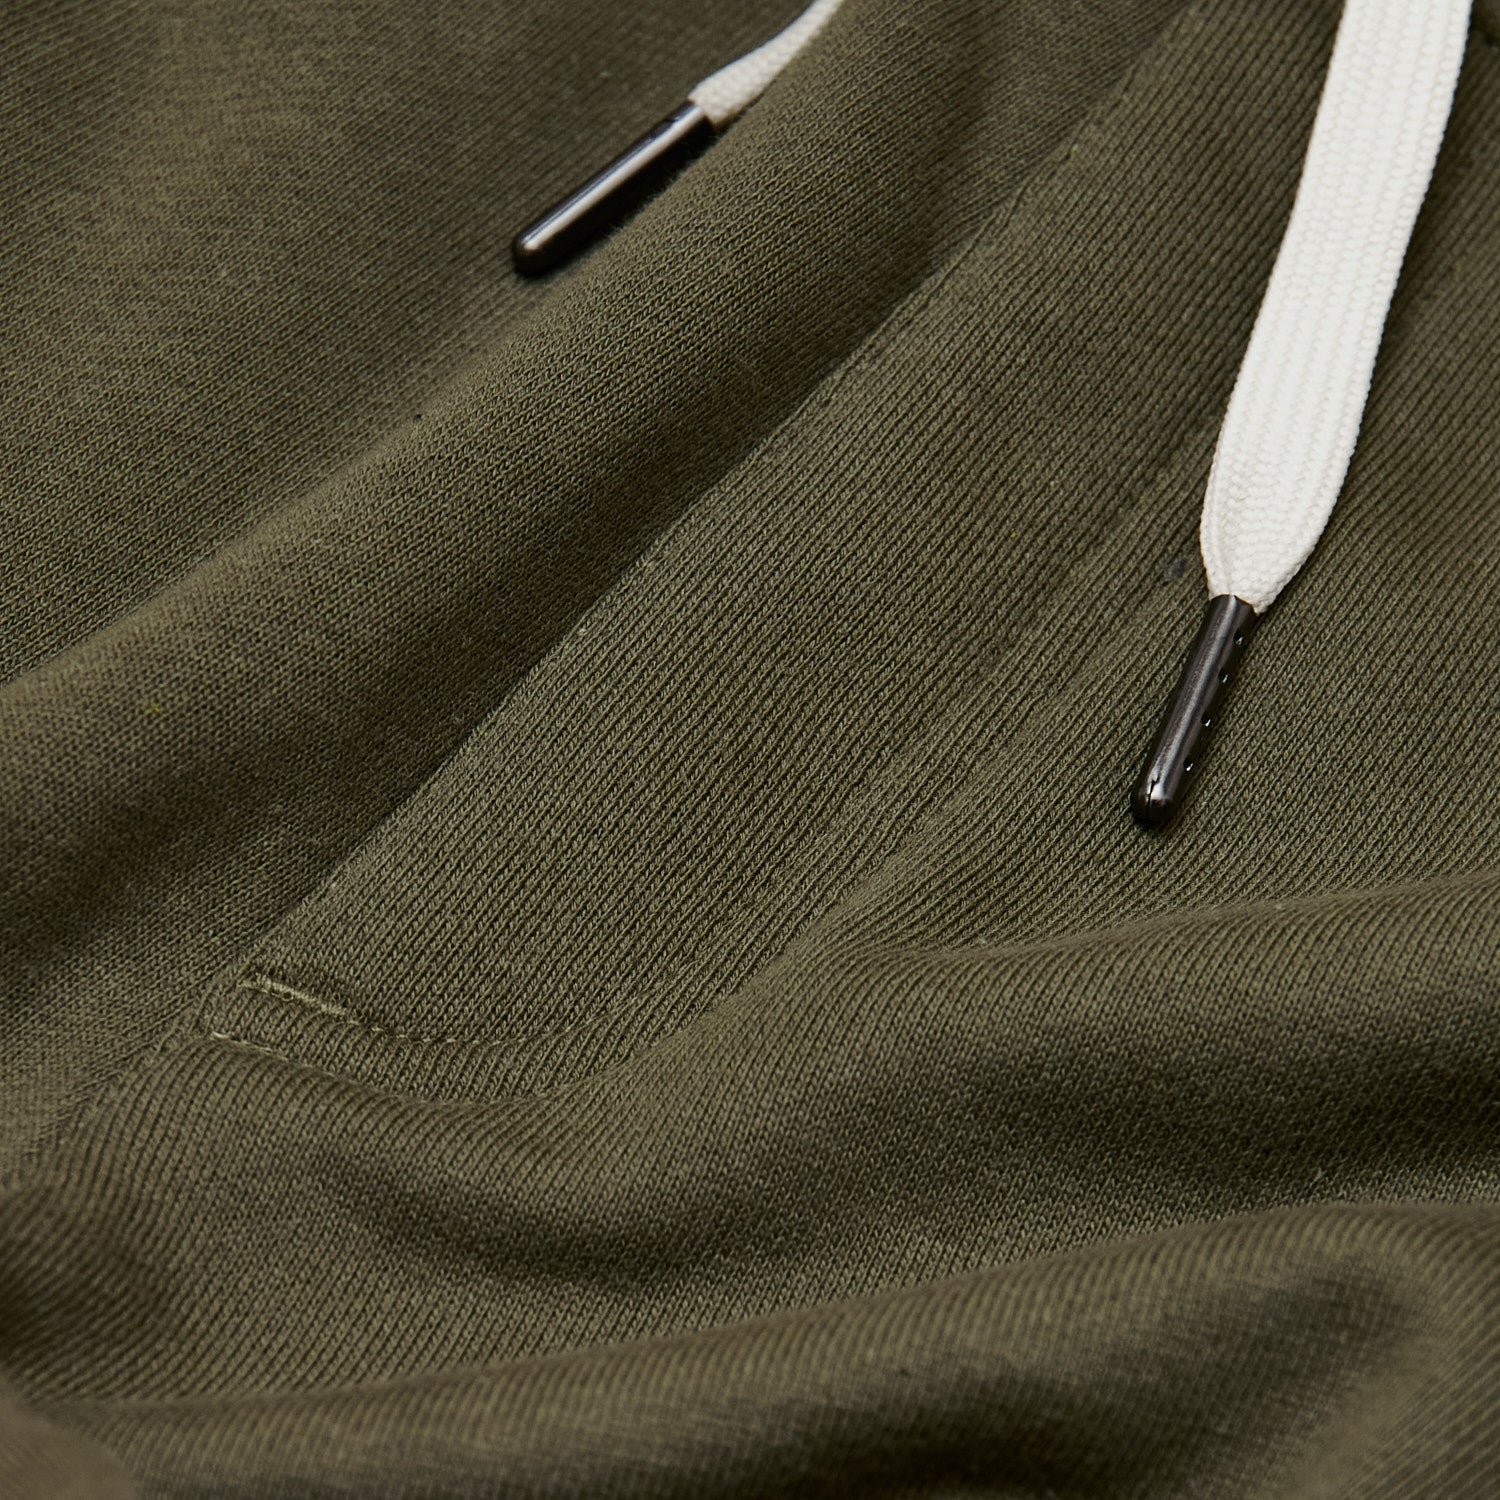 Military Green Fleece French Terry Jogger